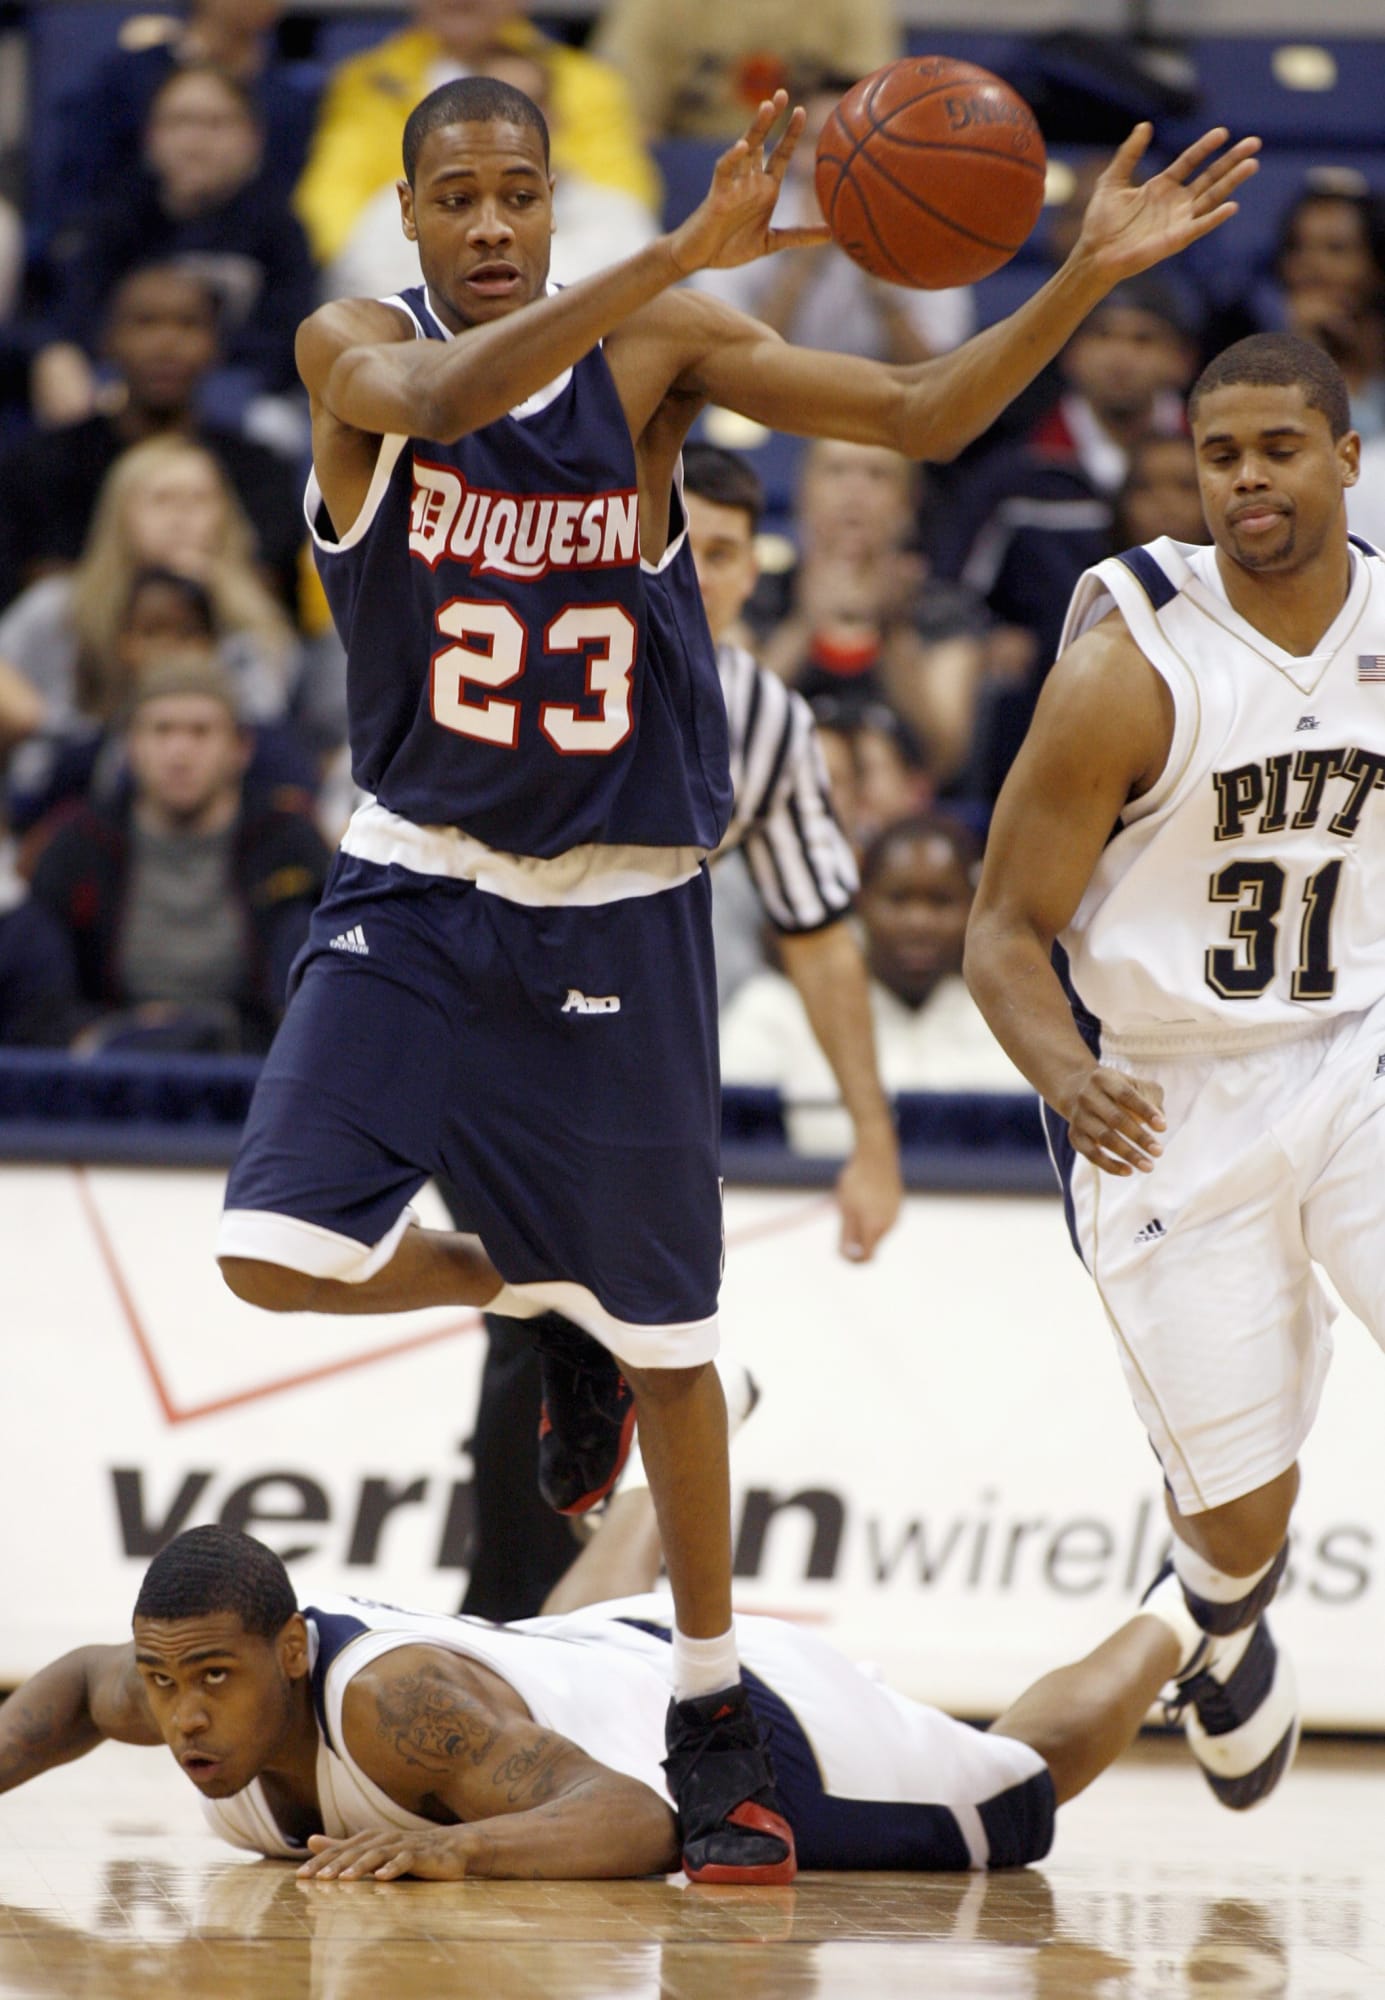 Pittsburgh vs. Duquesne College basketball game preview